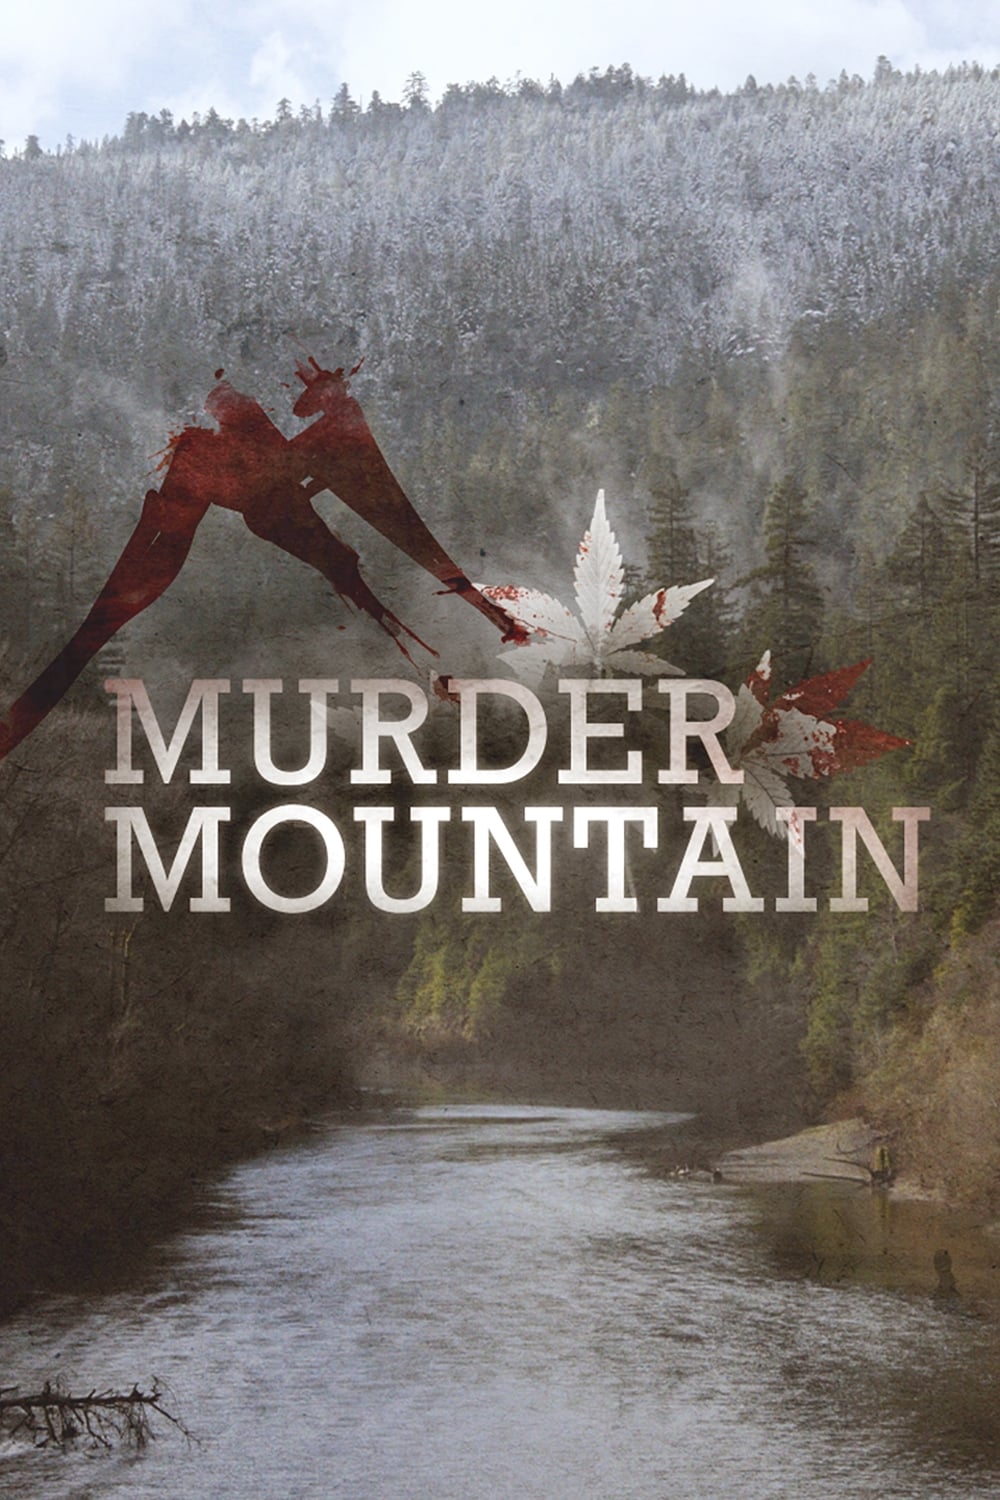 Murder Mountain TV Shows About Missing Person